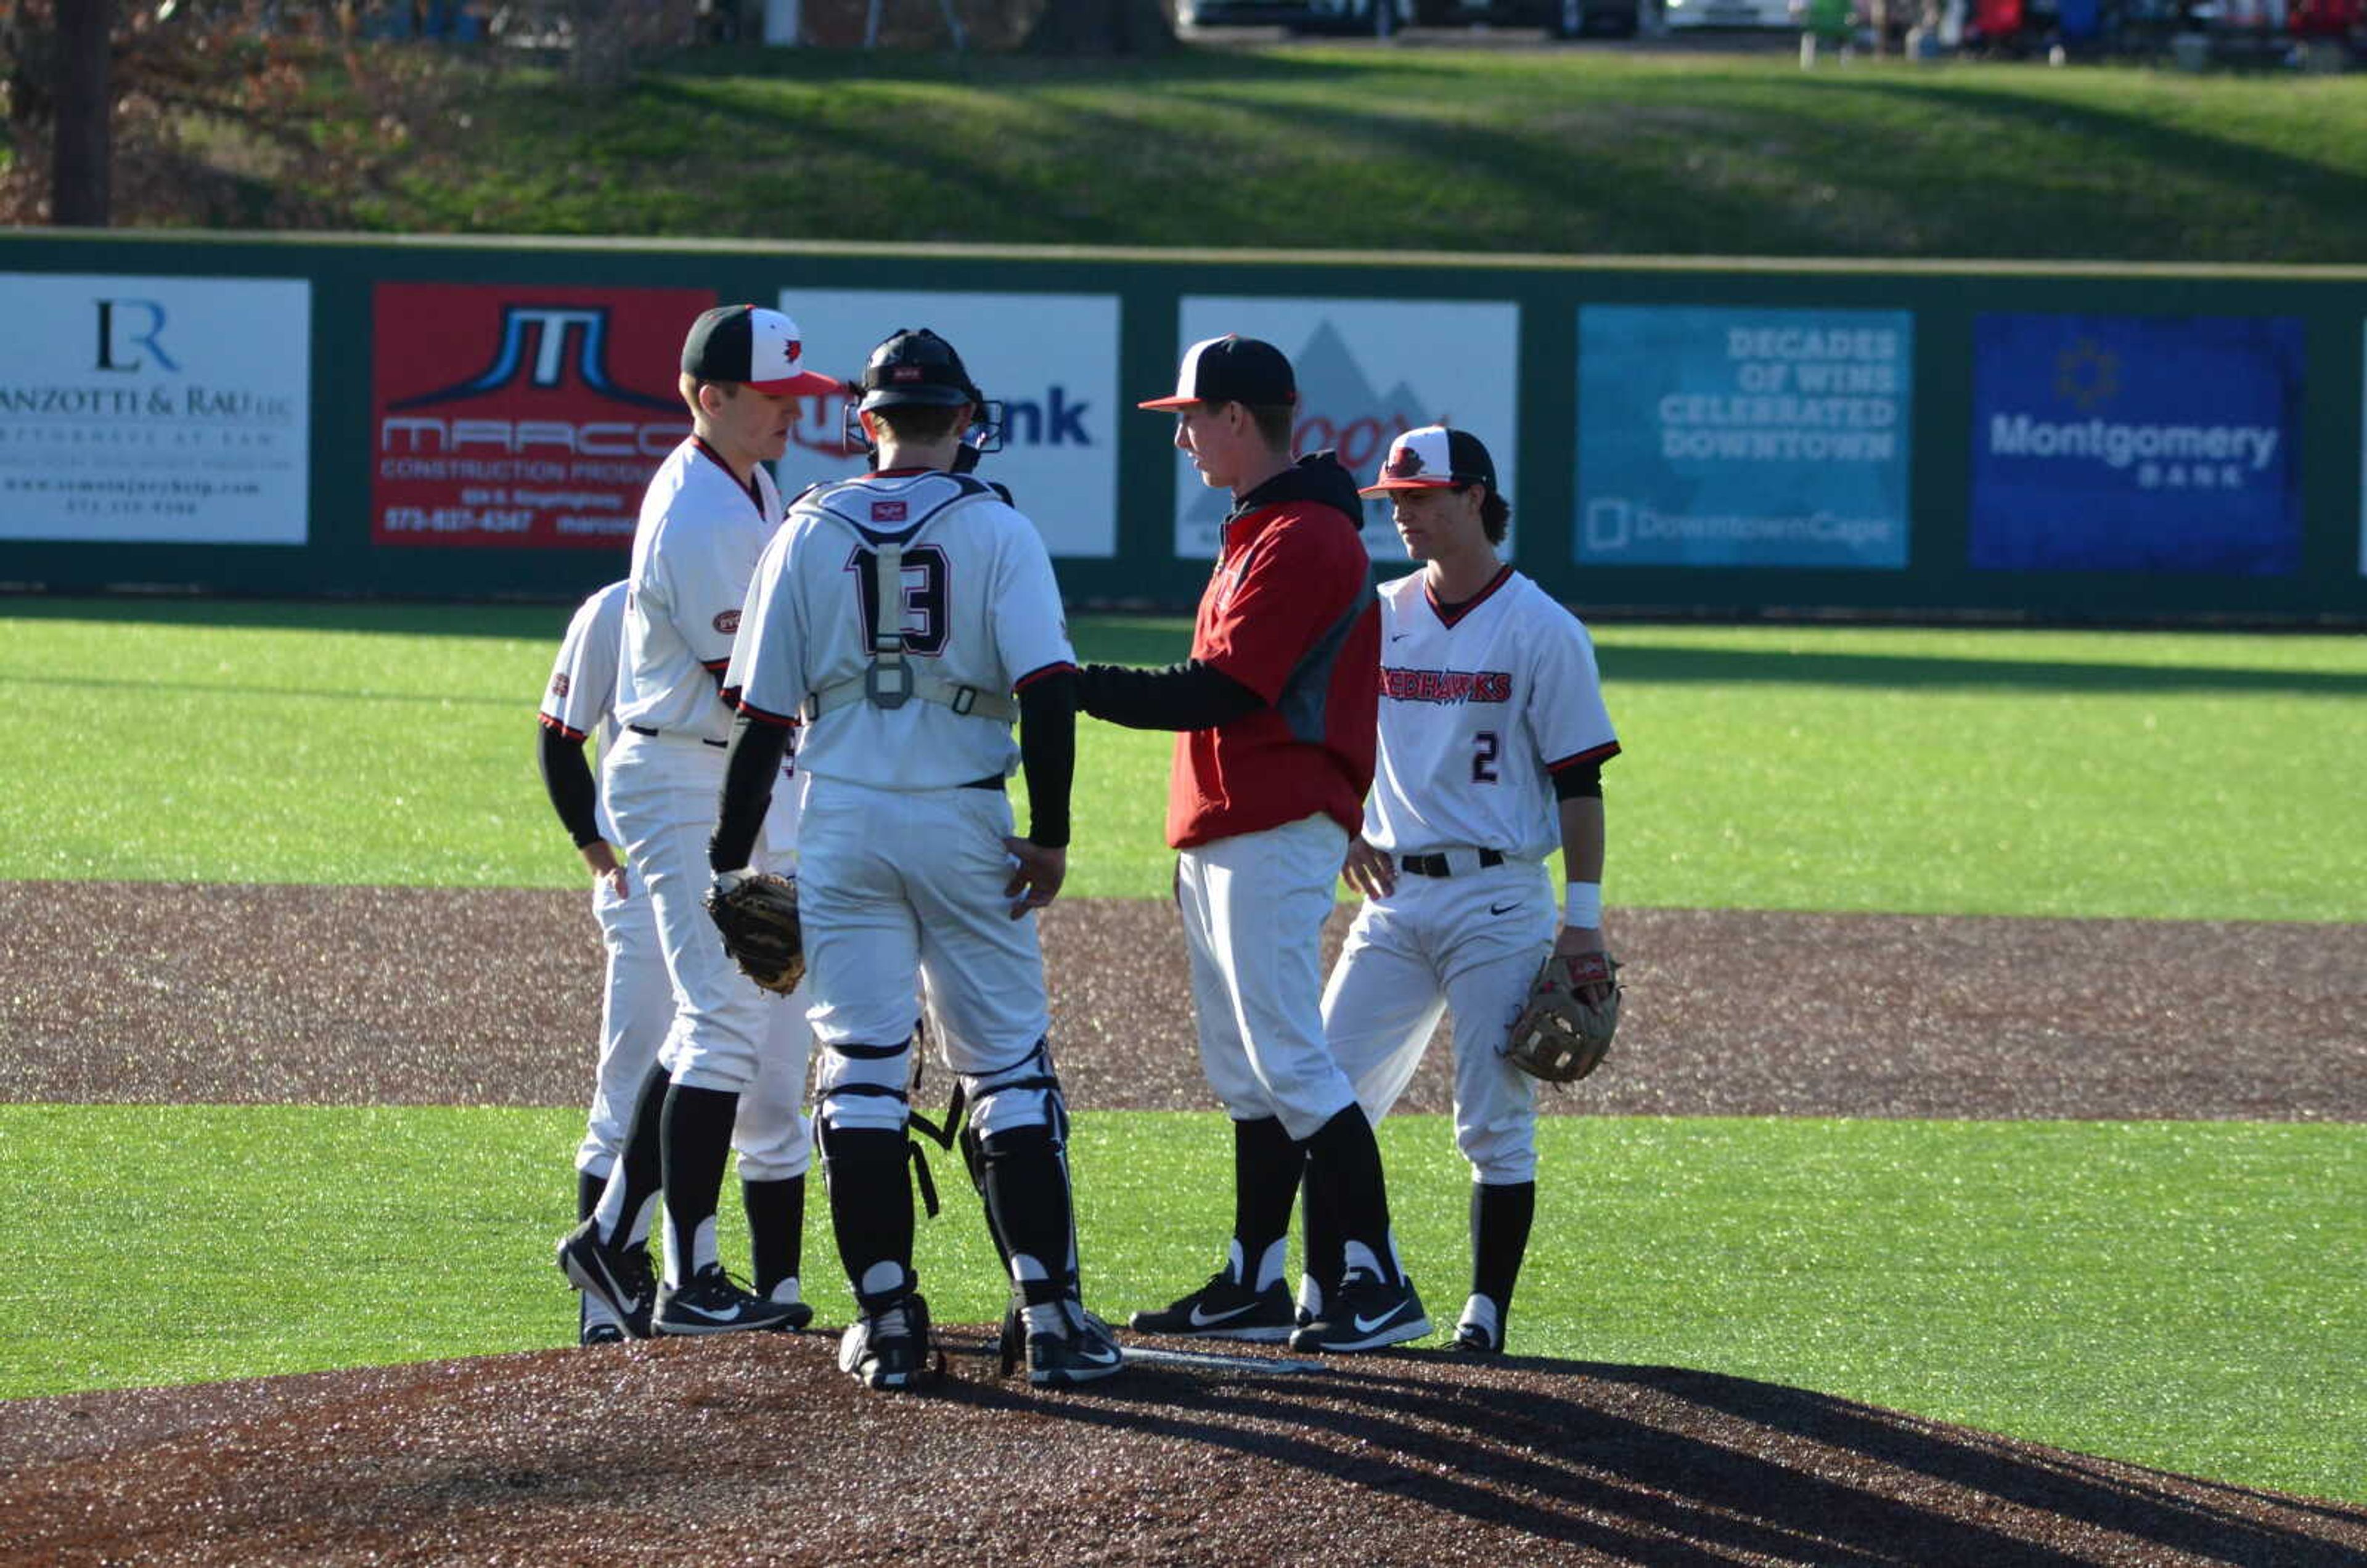 Members of the Southeast baseball team meet on the mound during a pitching change during the game.